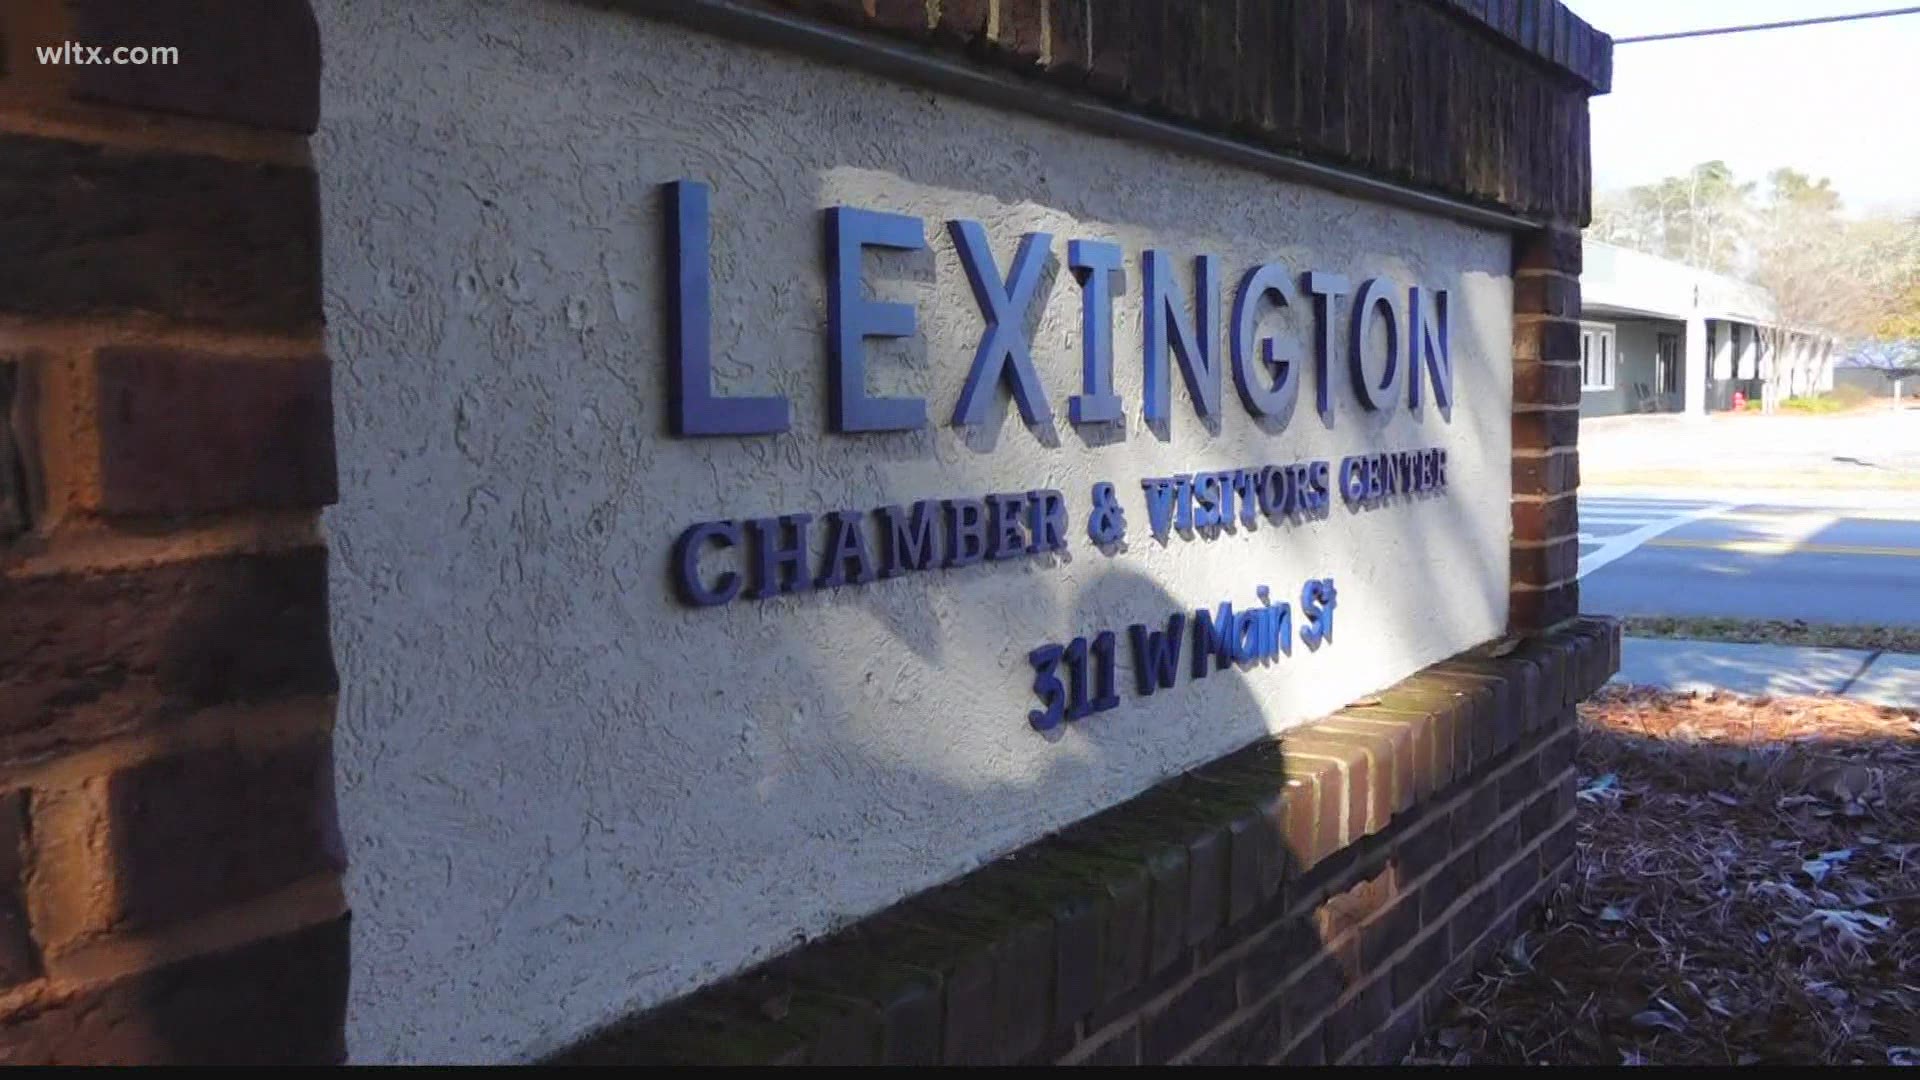 The President and CEO of Lexington Chamber believes businesses are cautiously optimistic now that the vaccine is in the state.